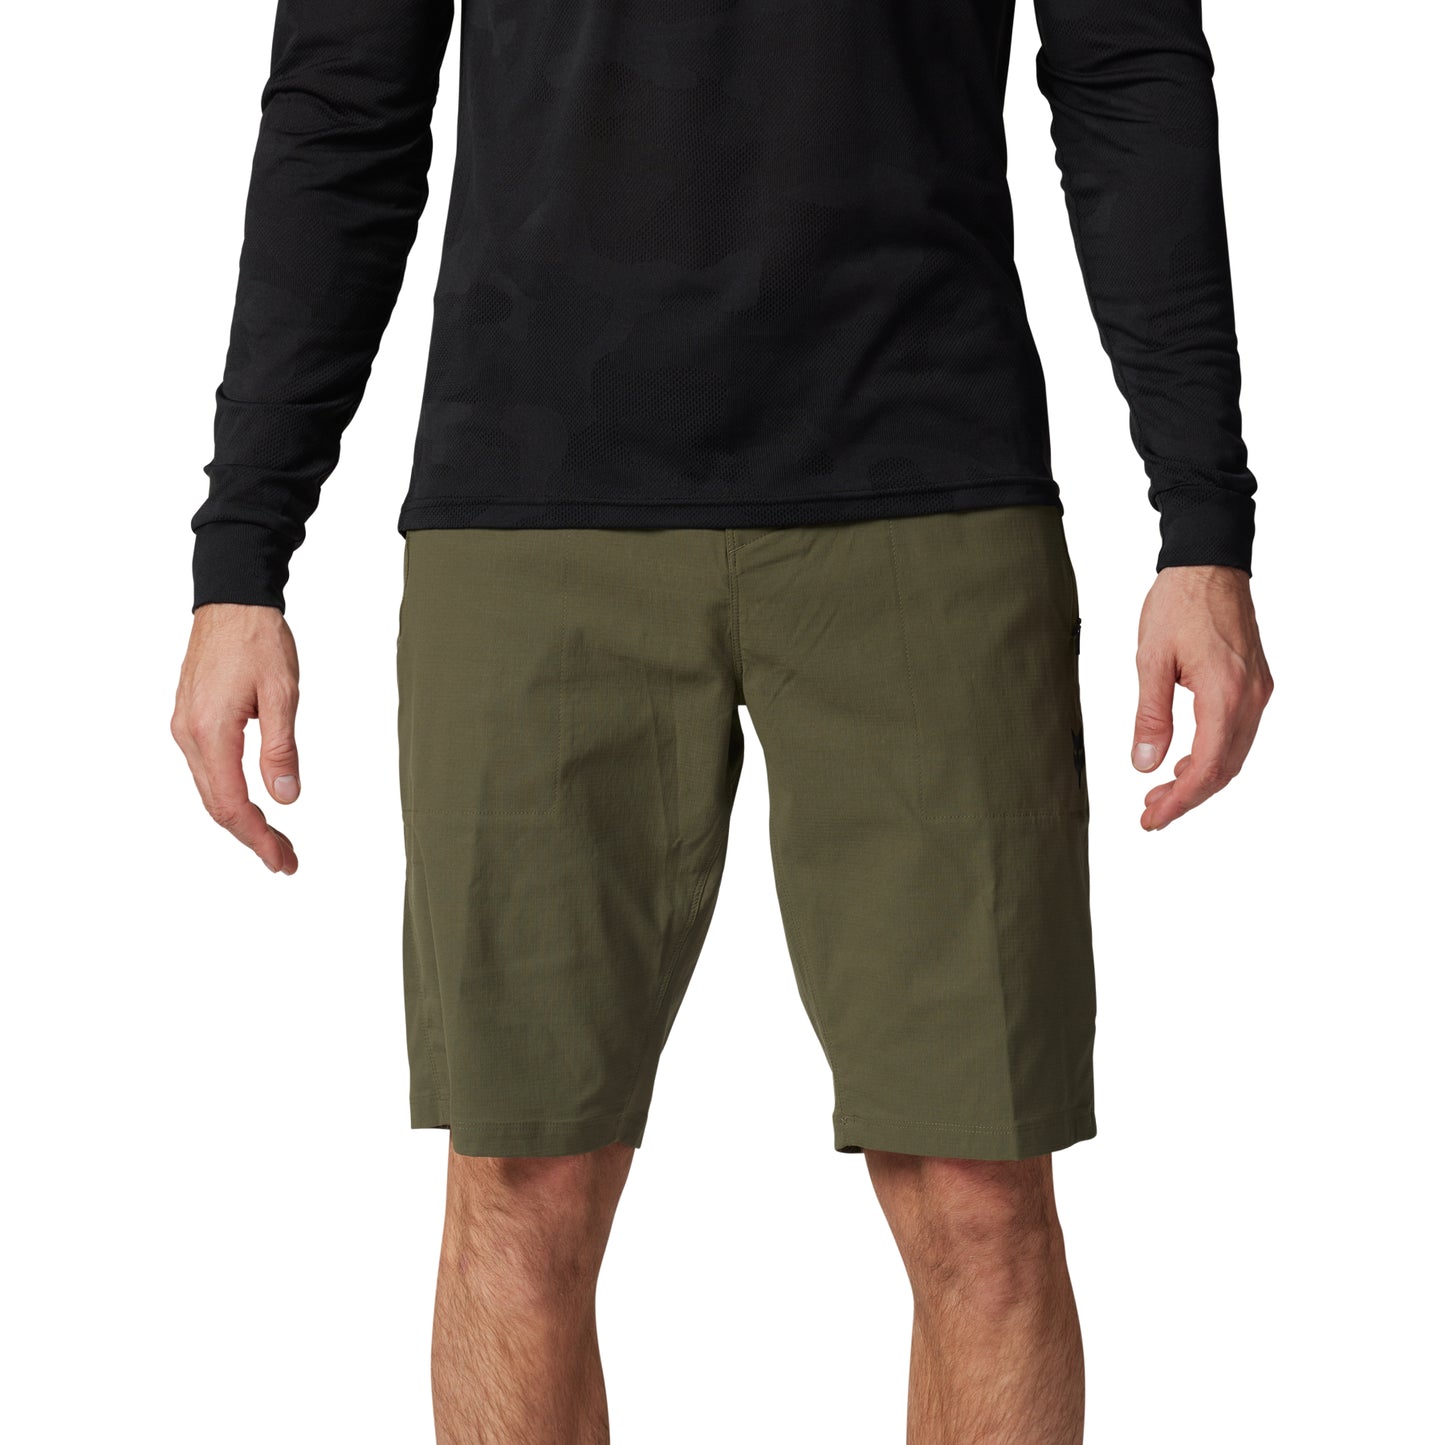 Fox Ranger Shorts Without Liner - L-34 - Olive Green - Image 1